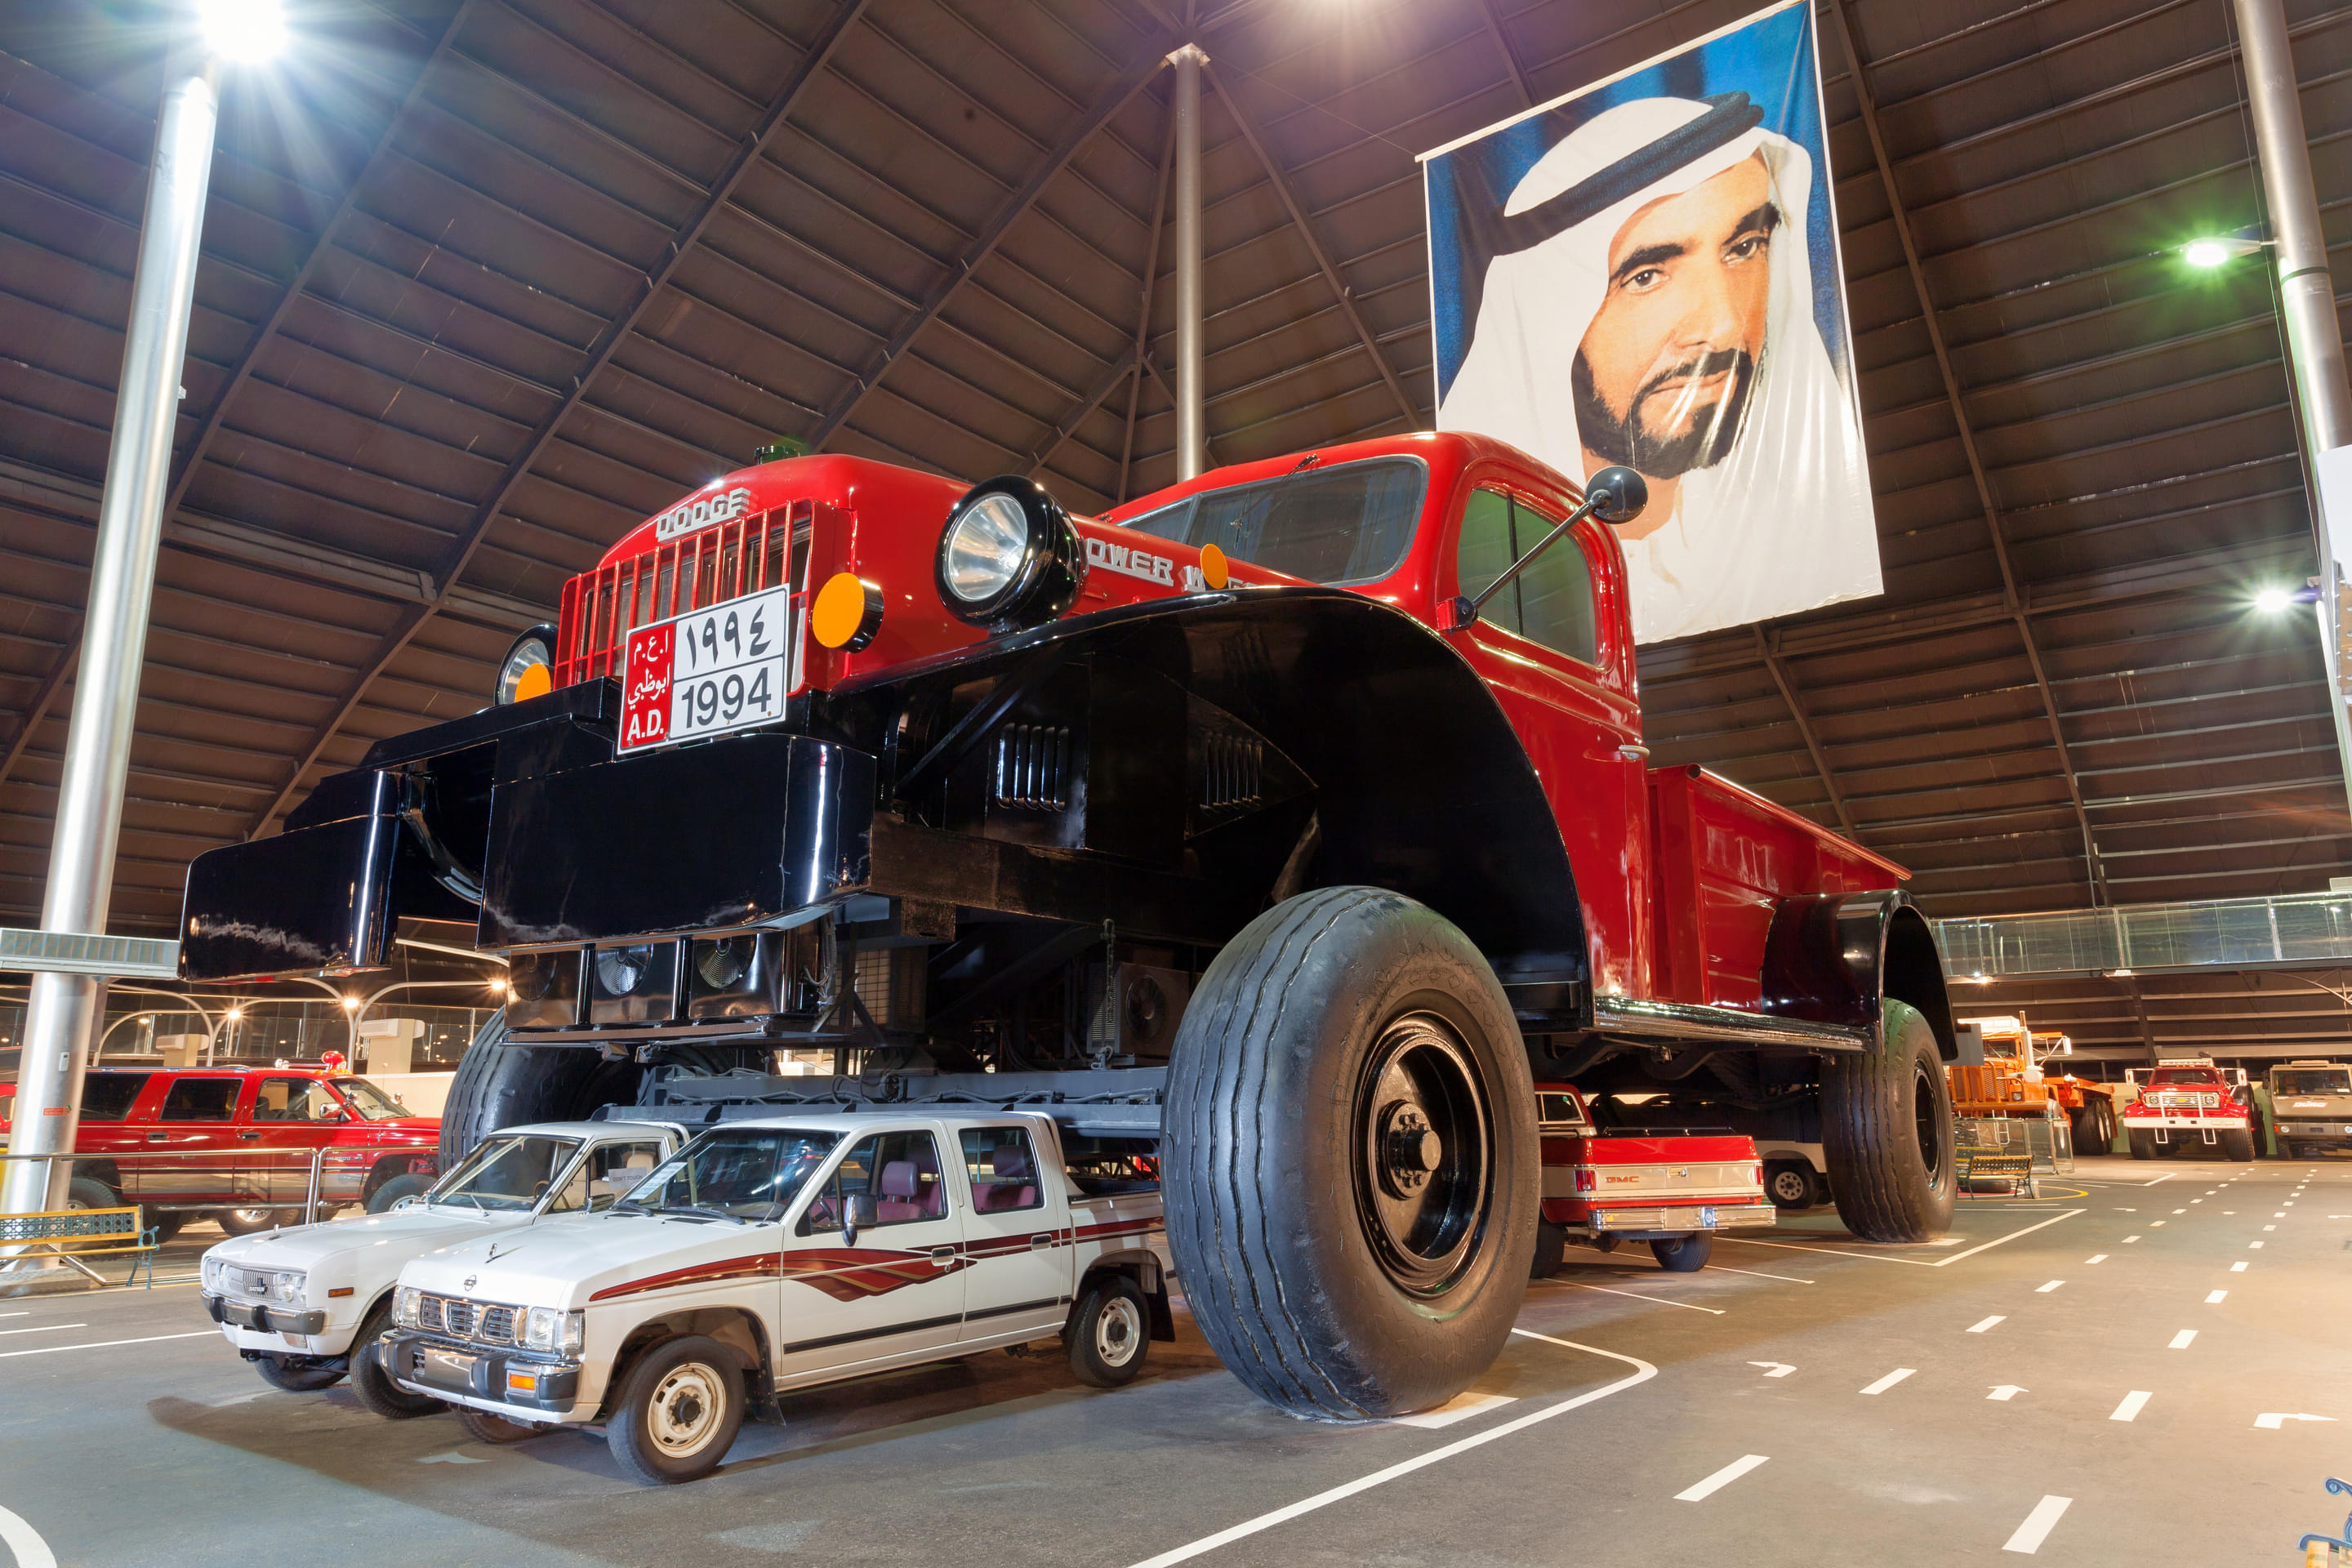 Emirates Auto National Museum Overview